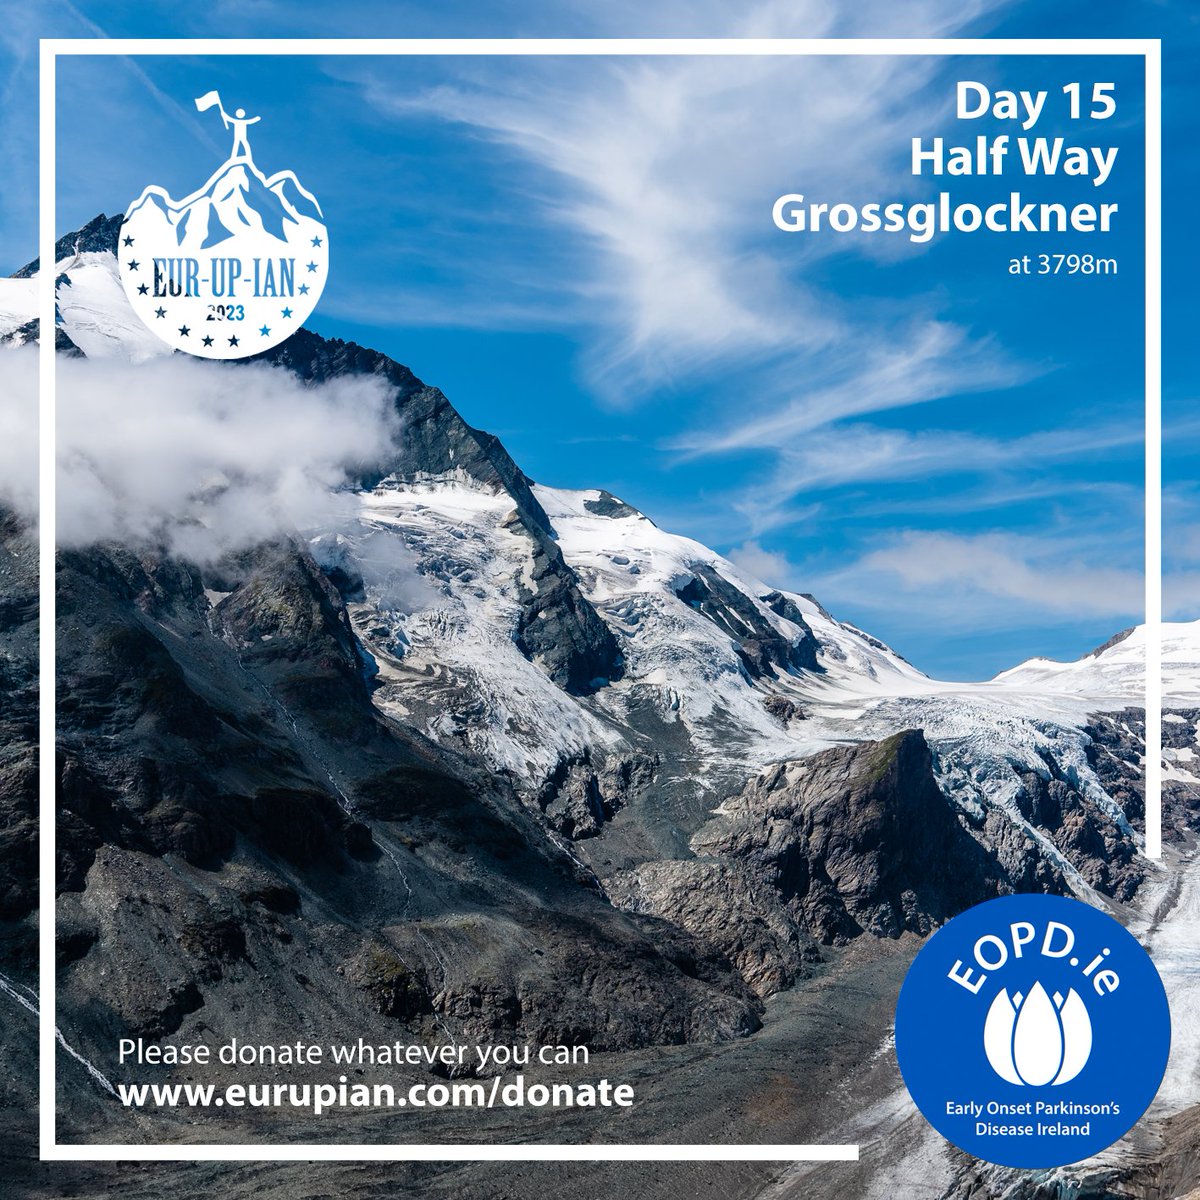 Day 15: Just over half-way through his epic challenge, @eurupian  is in Austria at the foot of Grossglockner (3,798 metres elevation), AKA the ‘black mountain’ ⛰️. Follow Ian's route as his incredible challenge continues eurupian.com/route/ #EurUpIan #eopd #parkinsonsdisease